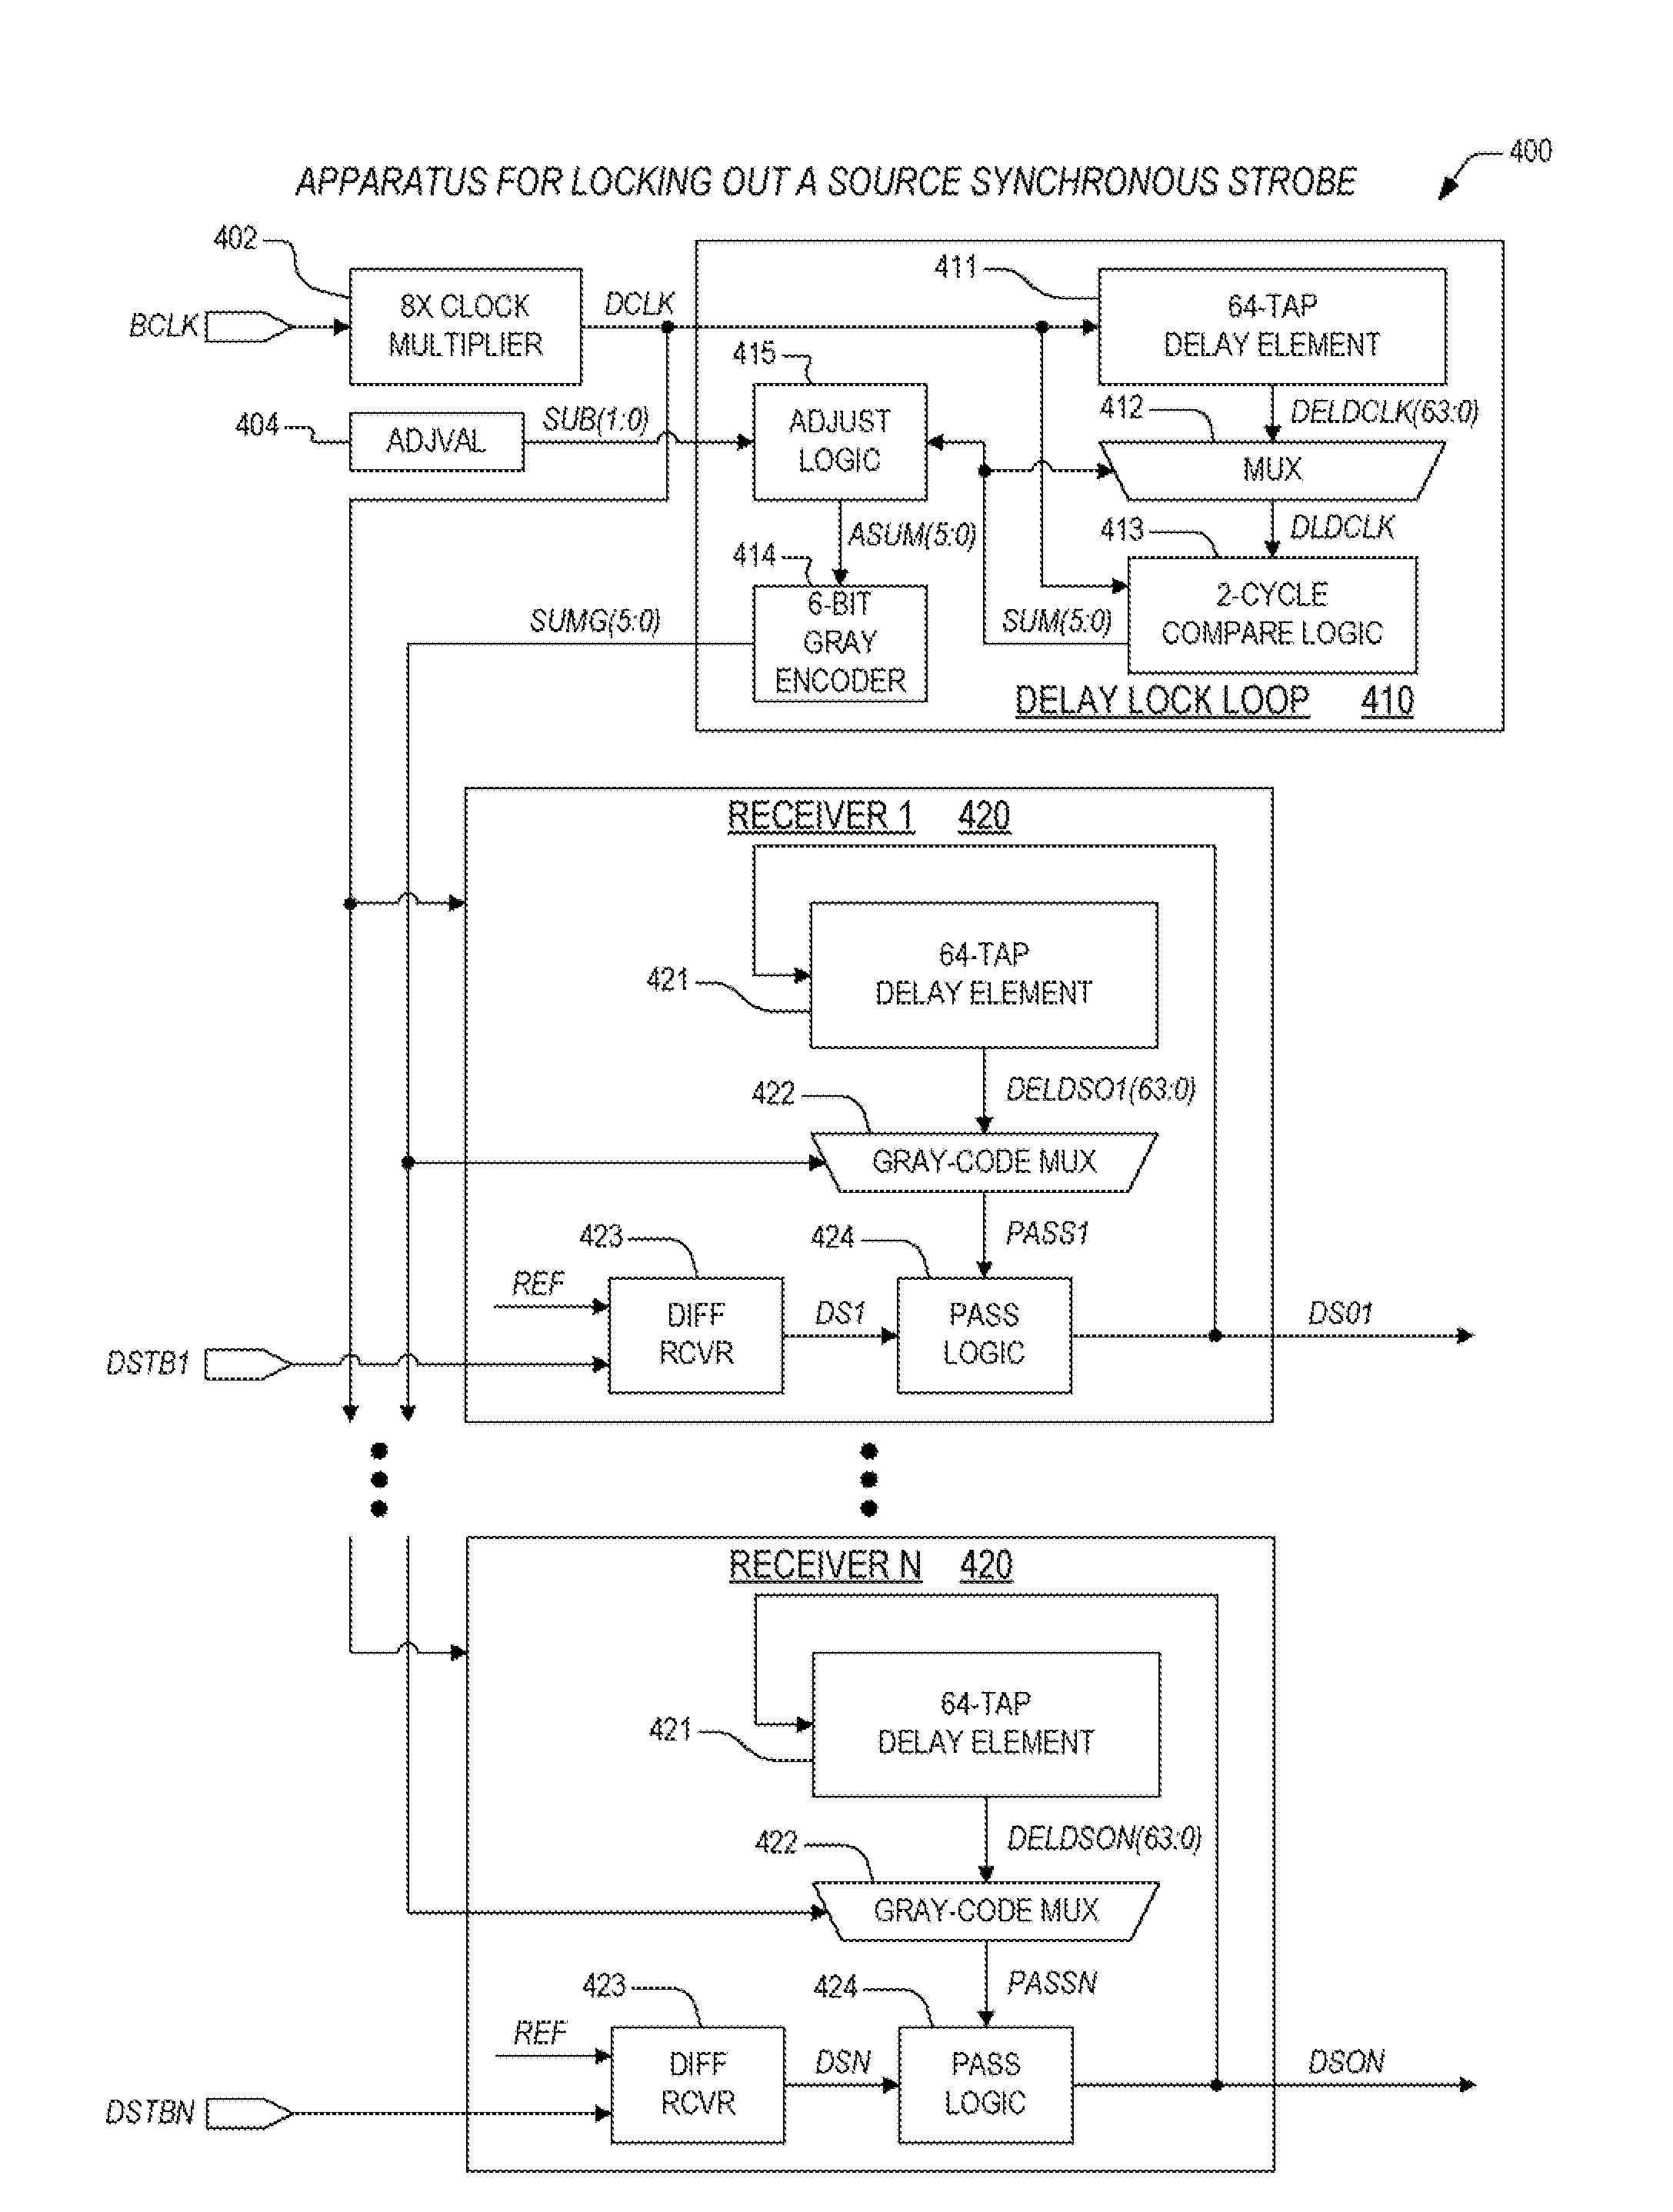 Encoded mechanism for source synchronous strobe lockout